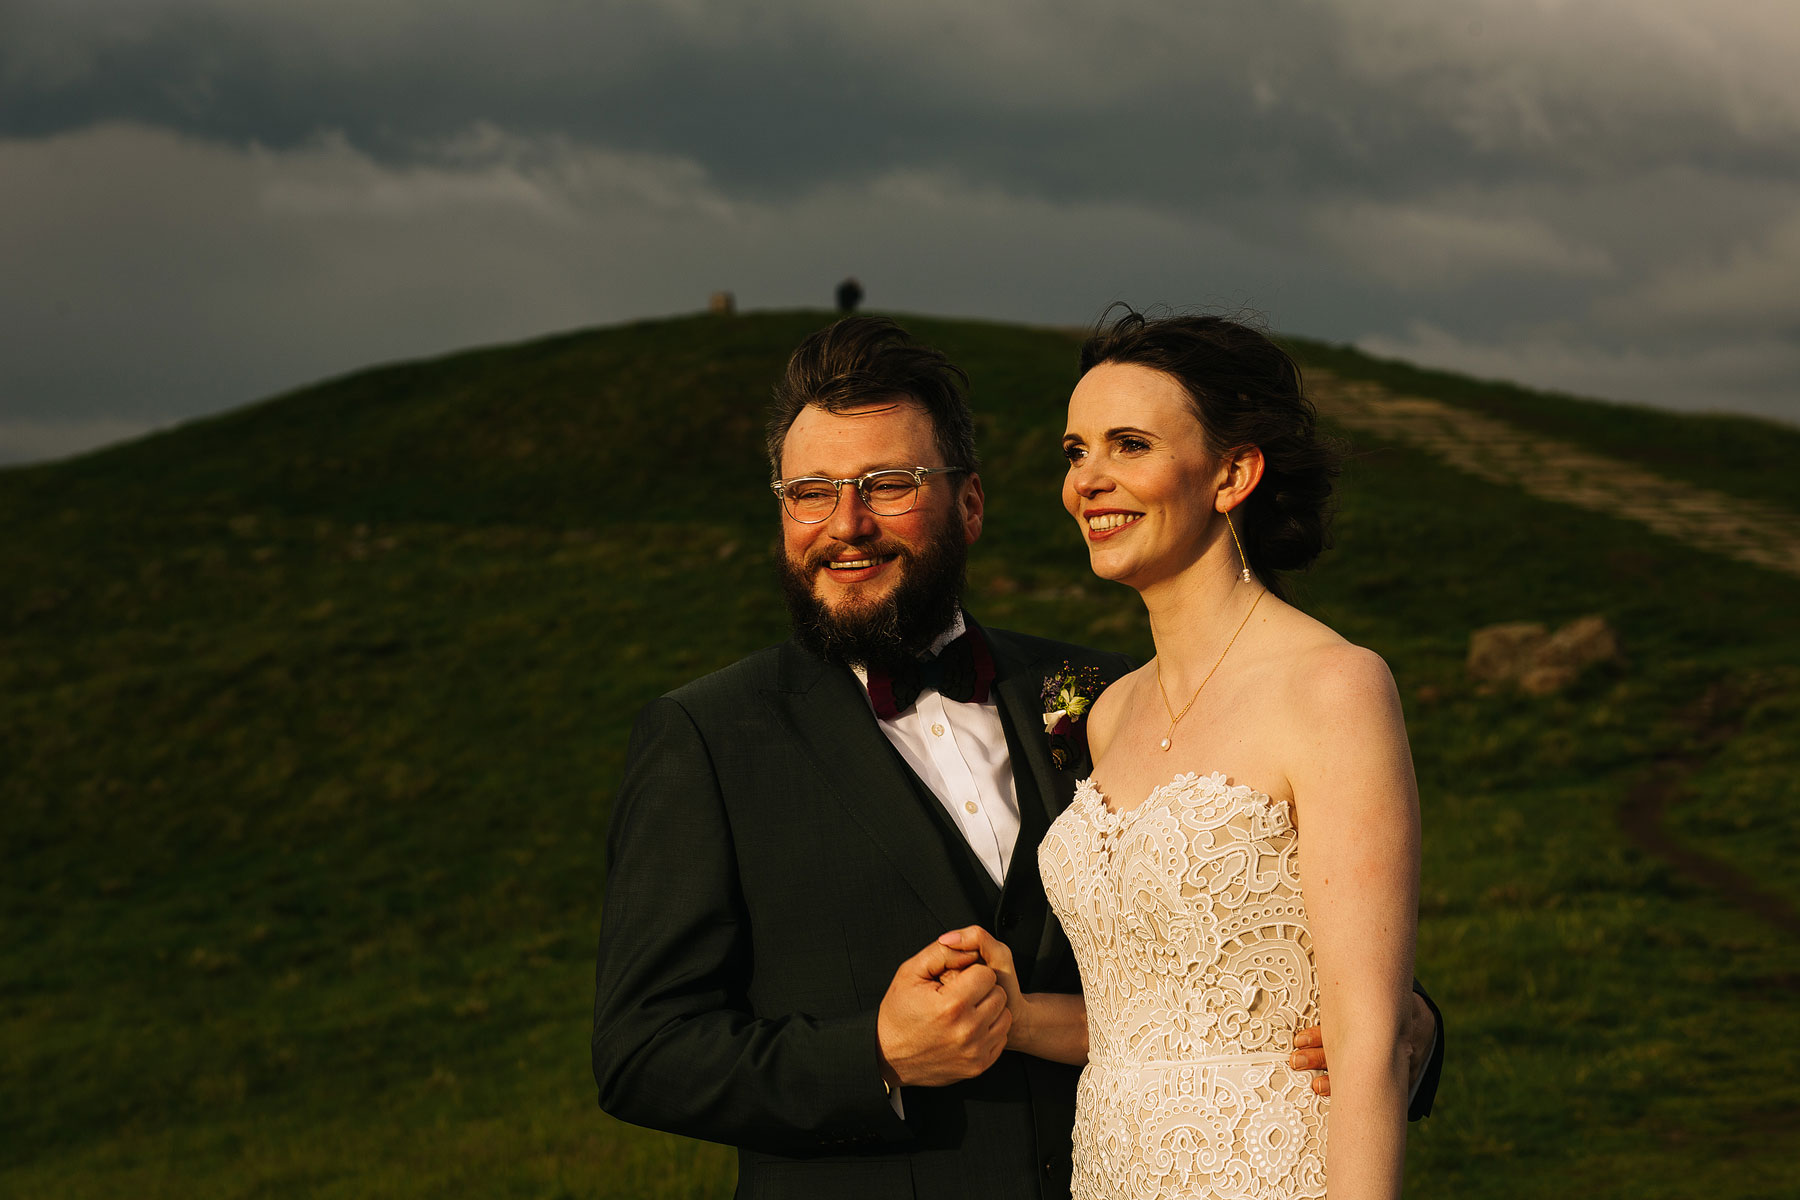 beautiful and natural wedding storytelling by yorkshire photographers